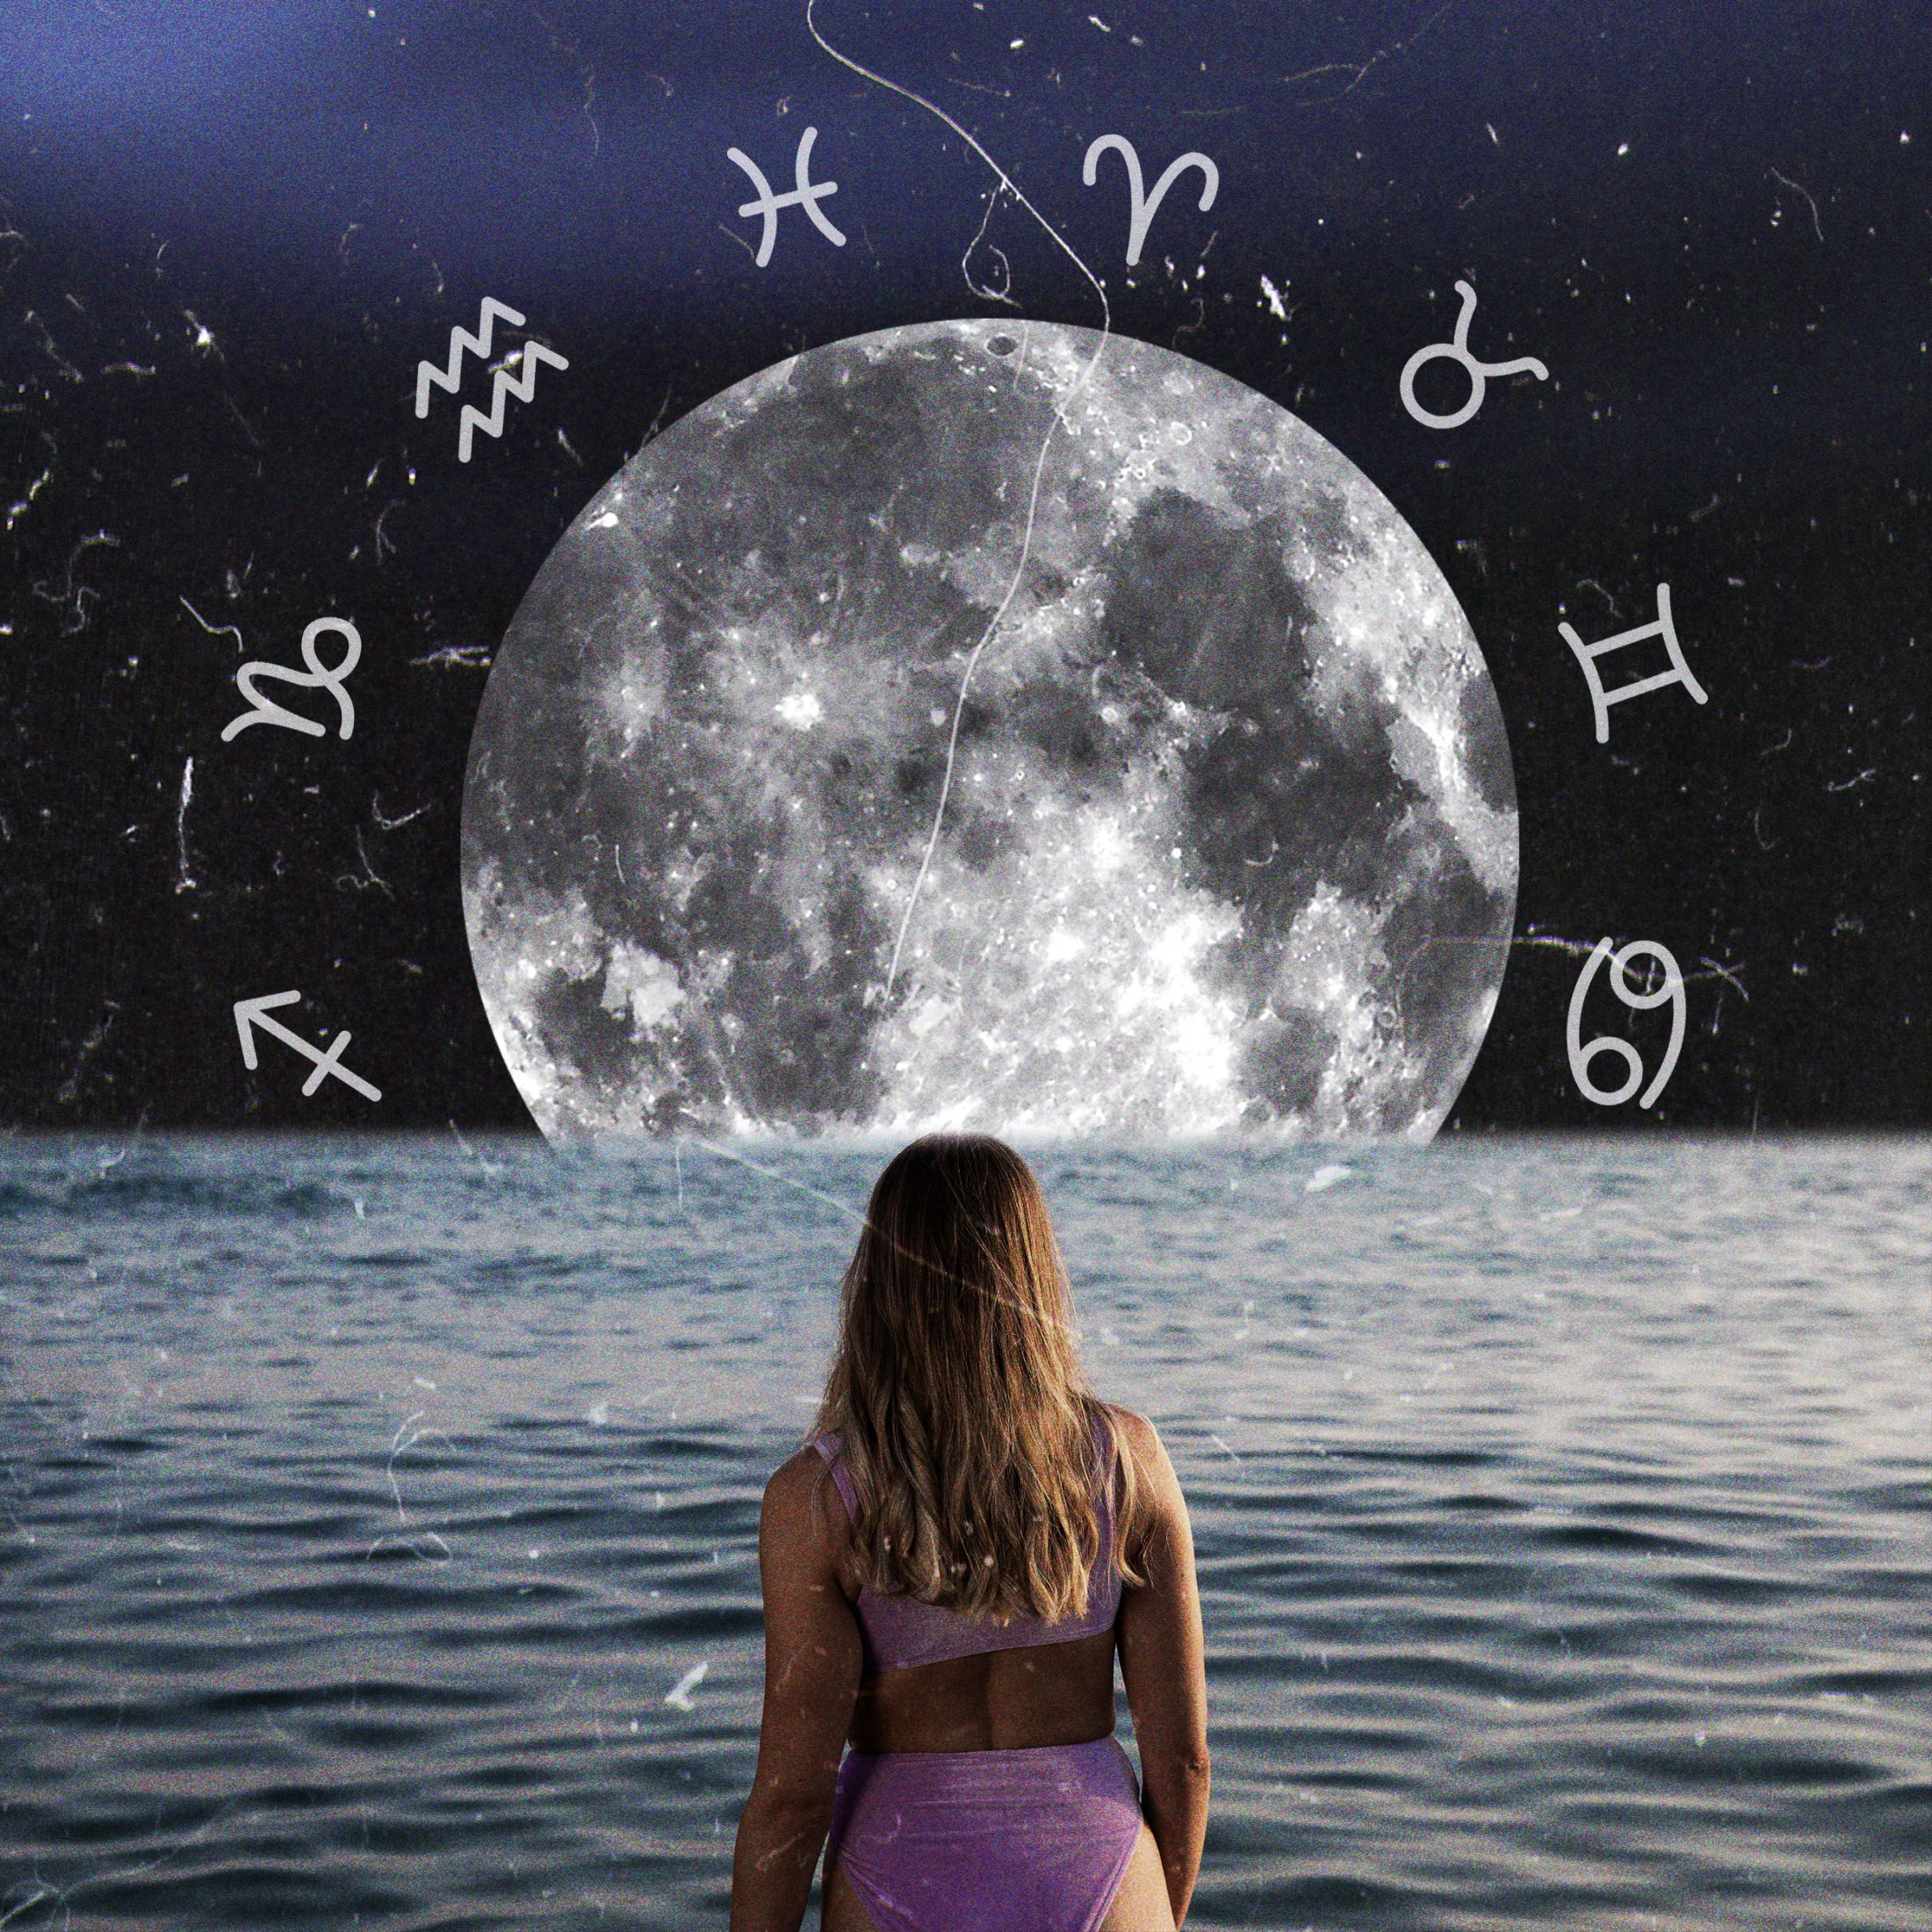 horoscope-and-astrology-collage.jpg